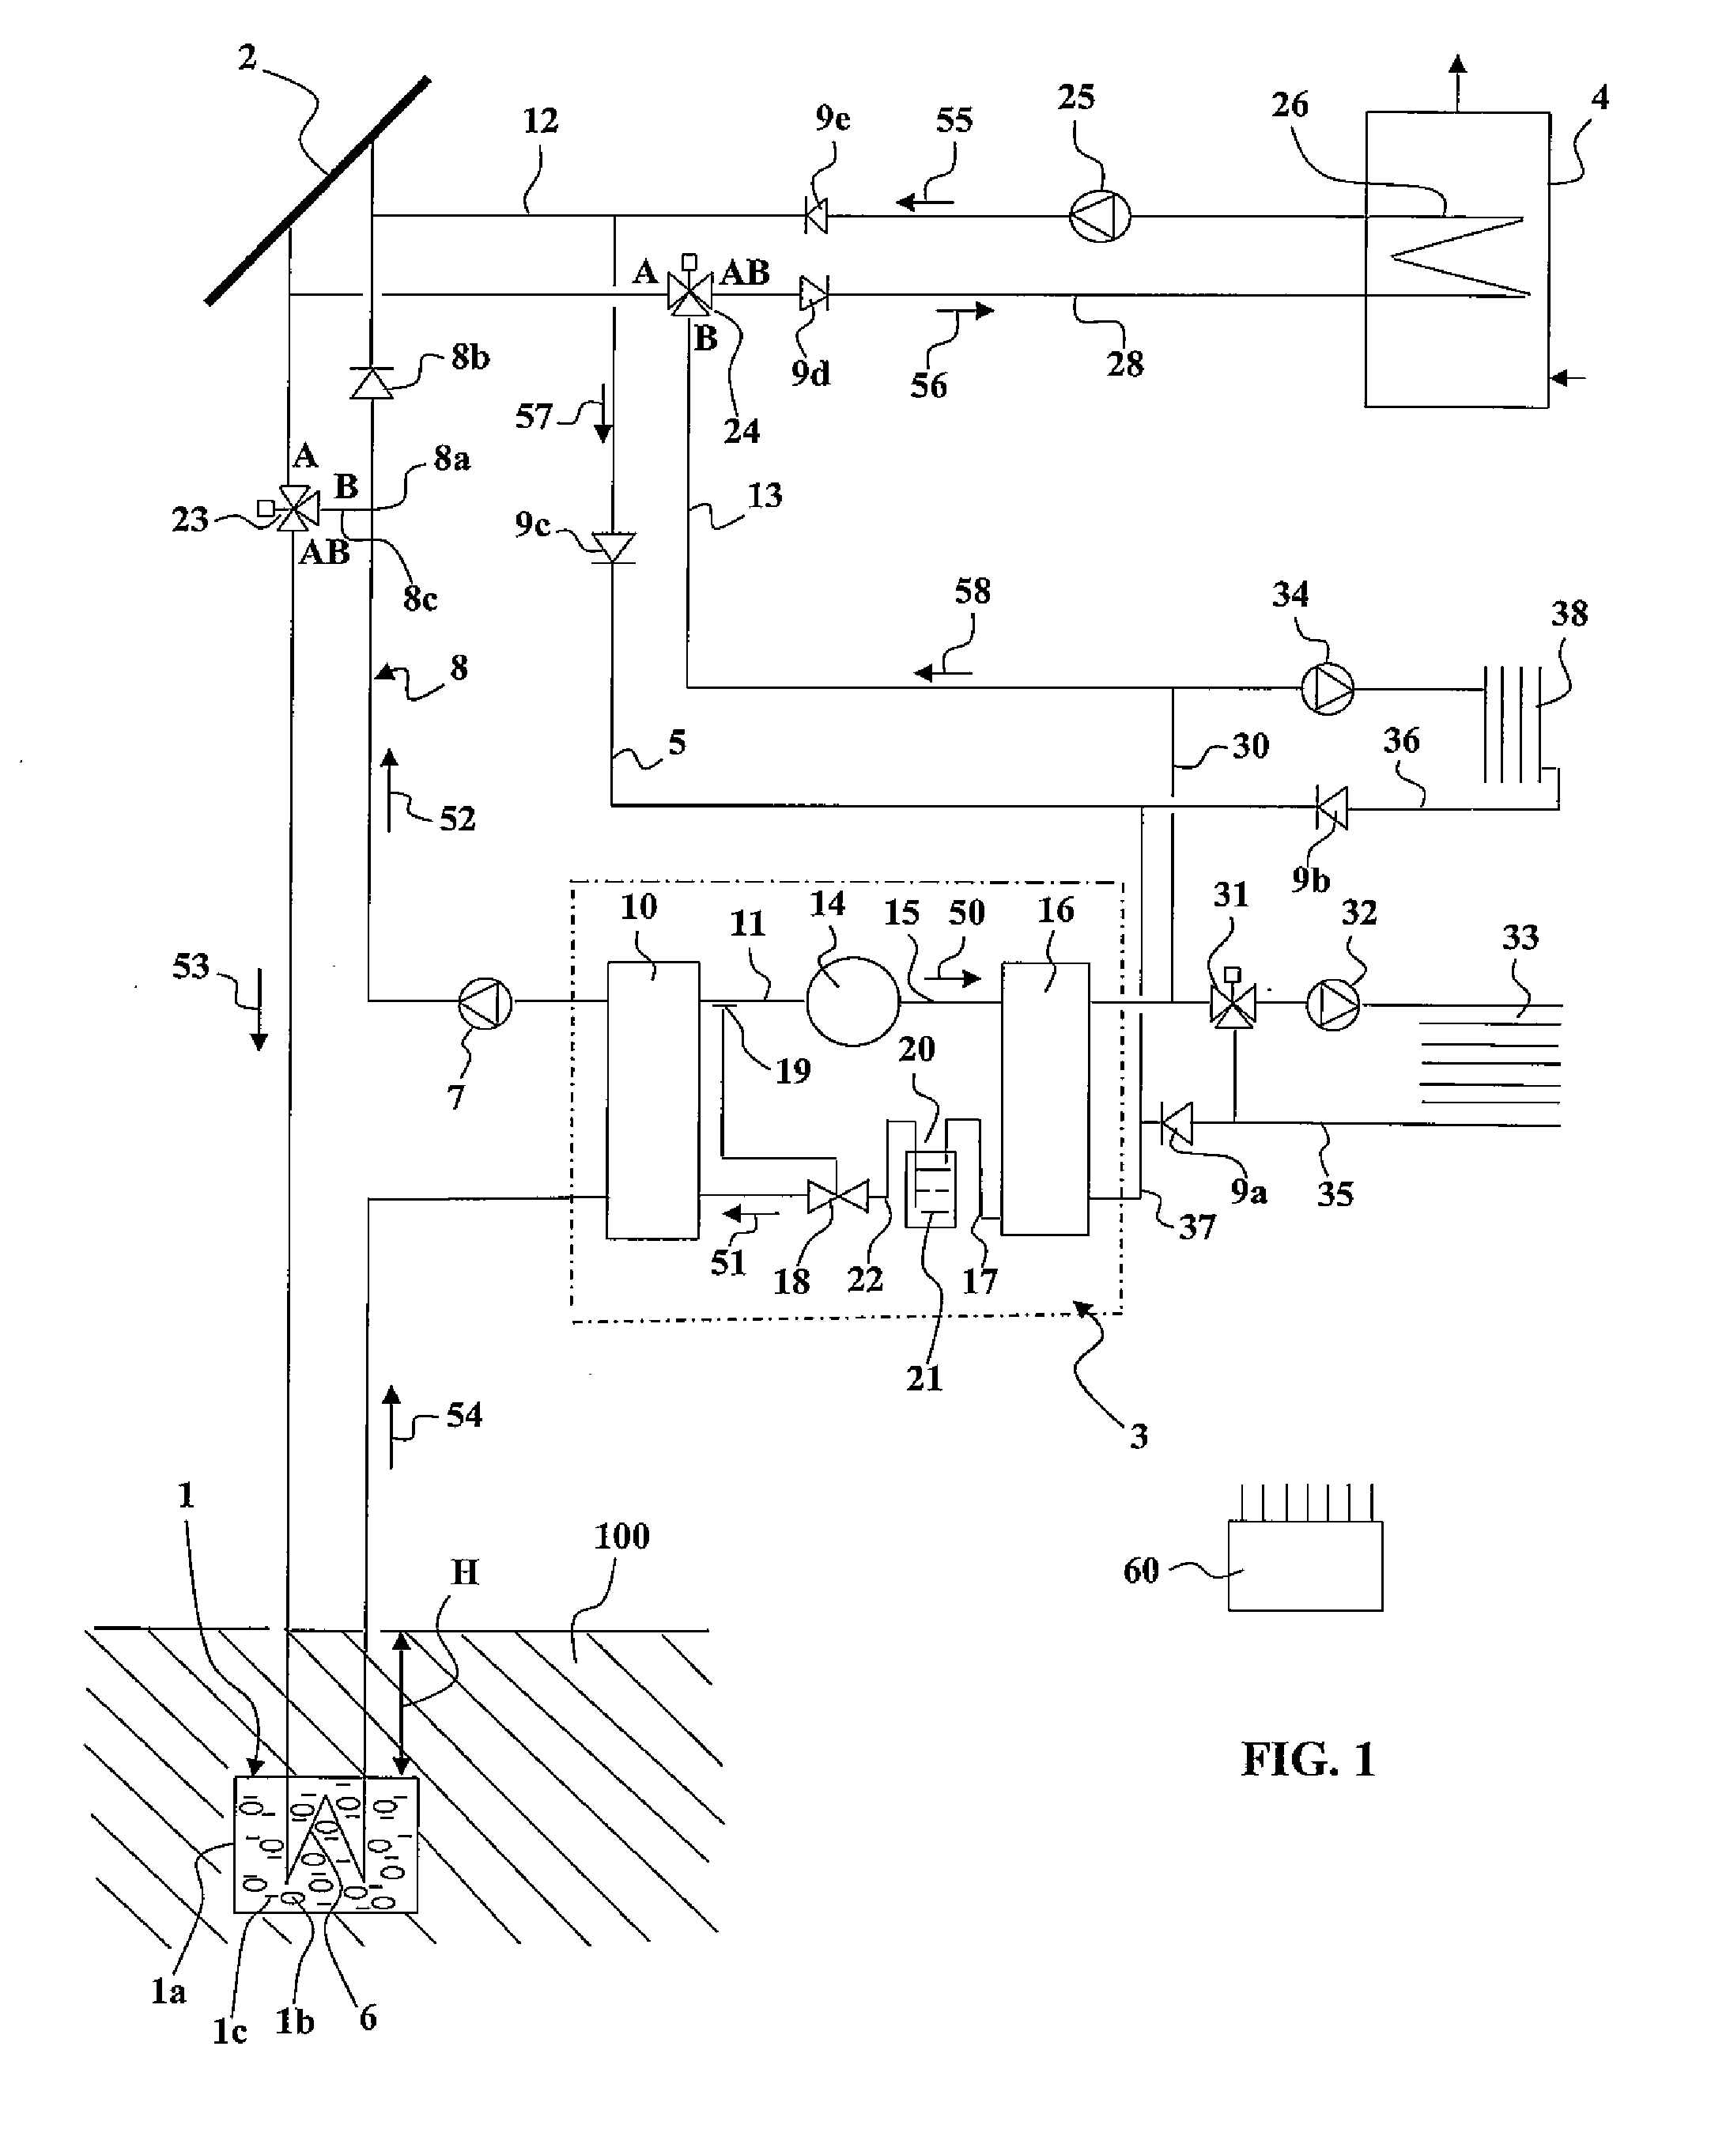 Device for heating, cooling and producing domestic hot water using a heat pump and low-temperature heat store